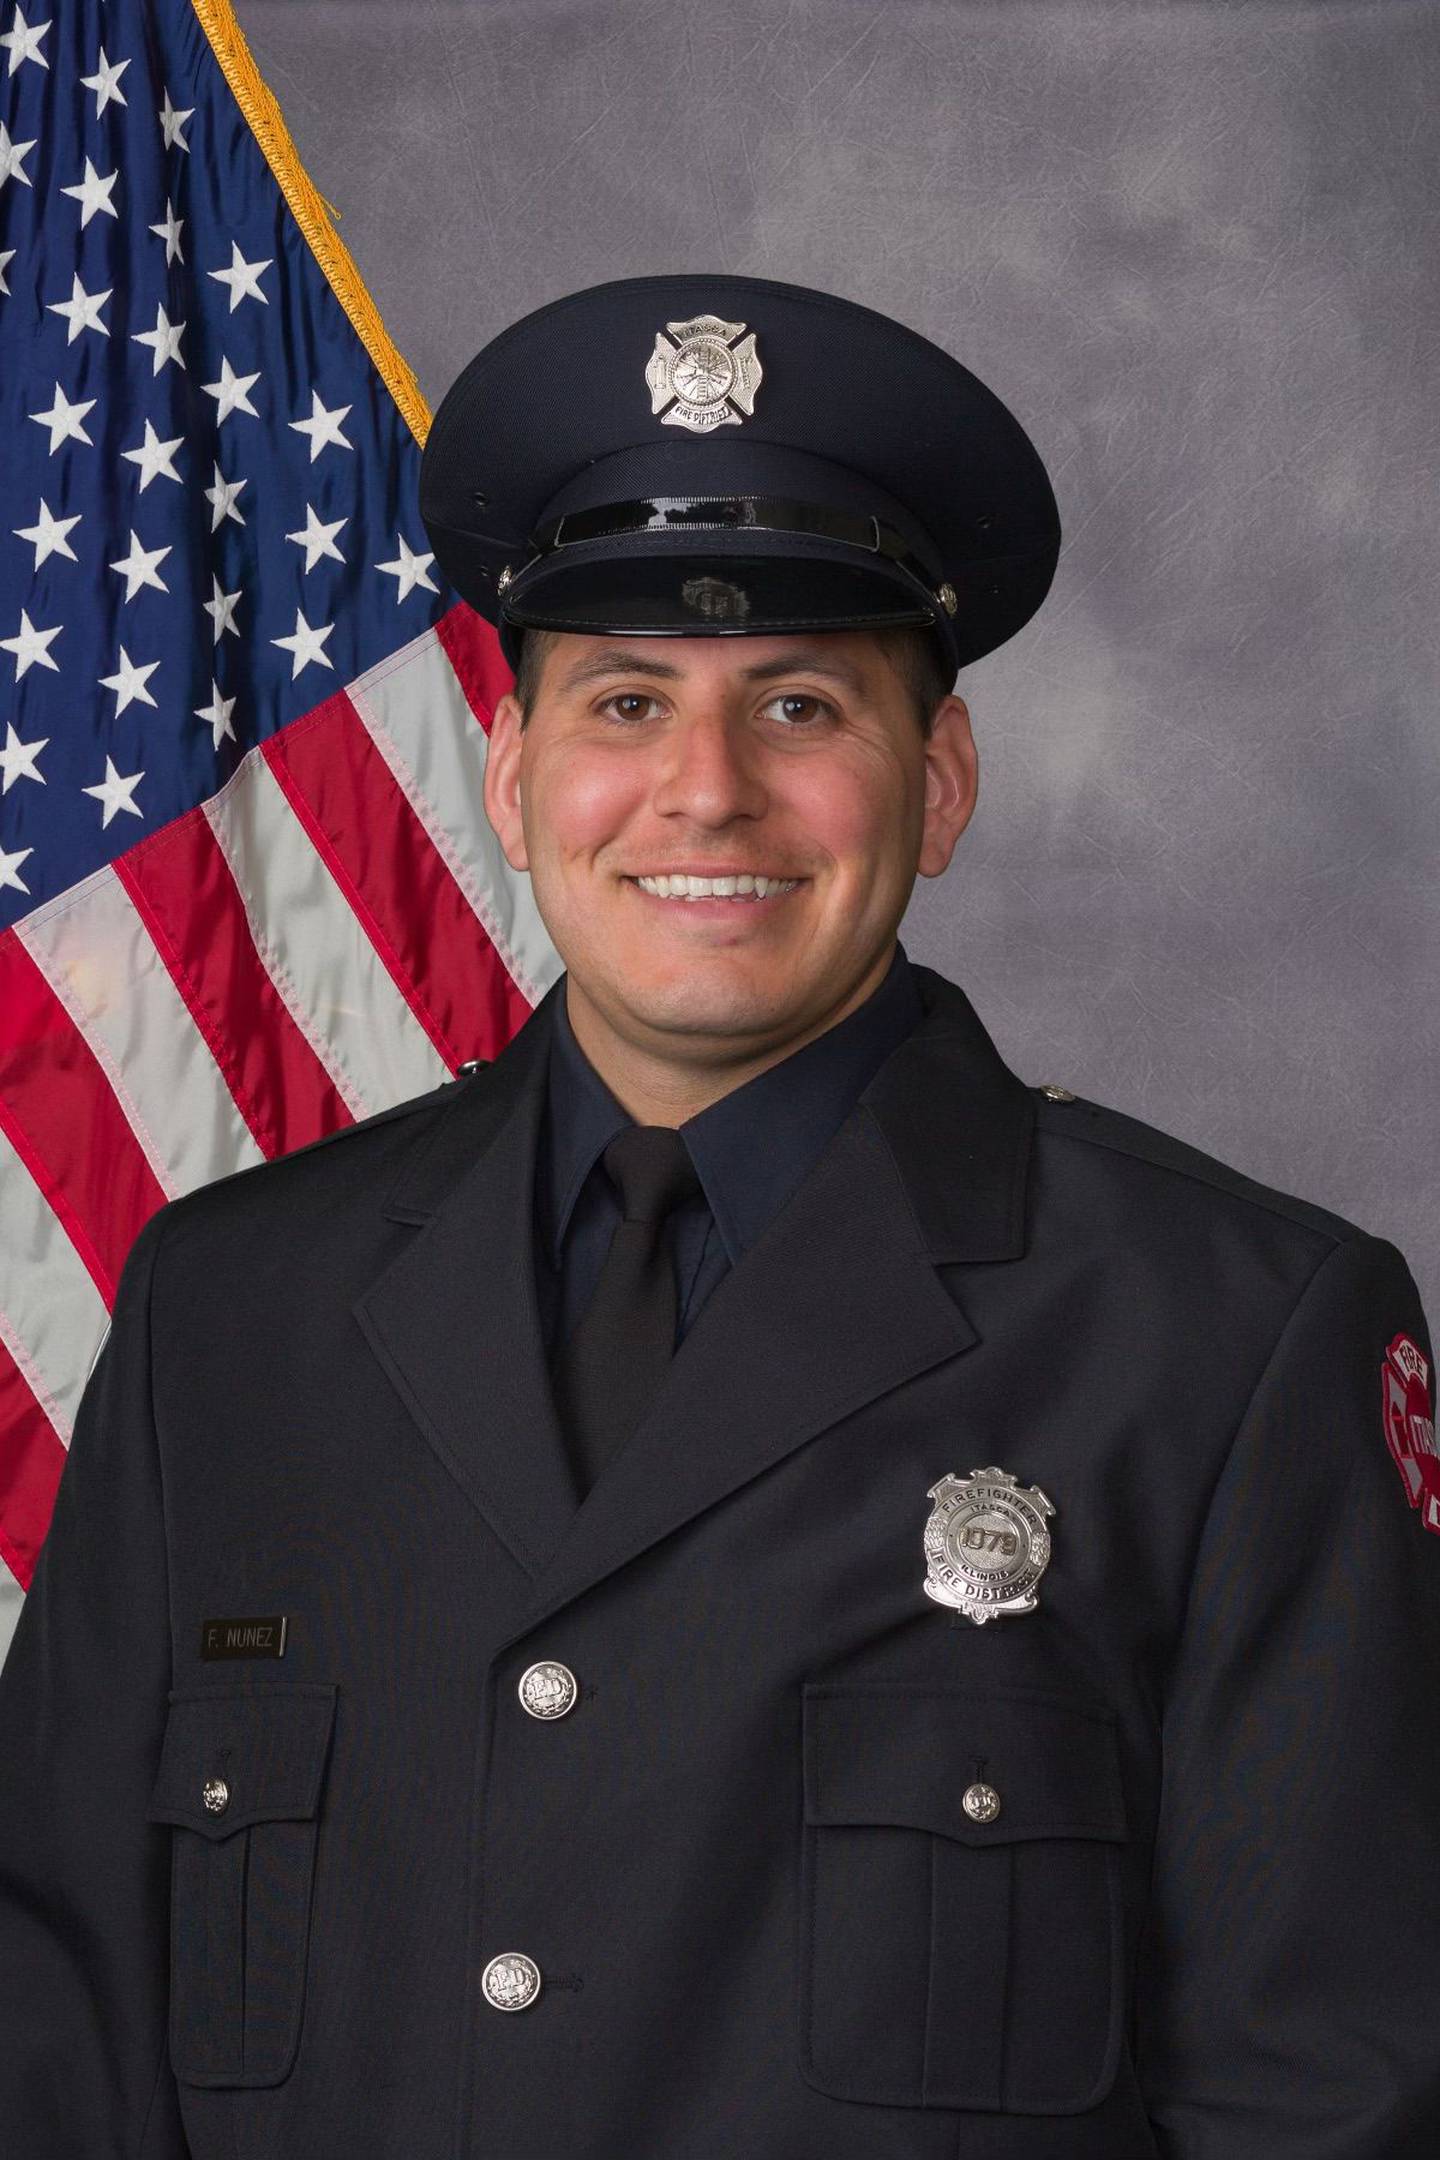 Frank Nunez, 34, of Crystal Lake, is an Itasca Fire Protection District firefighter. Nunez was taken to his home for hospice care on Tuesday, Sept. 27, 2022.